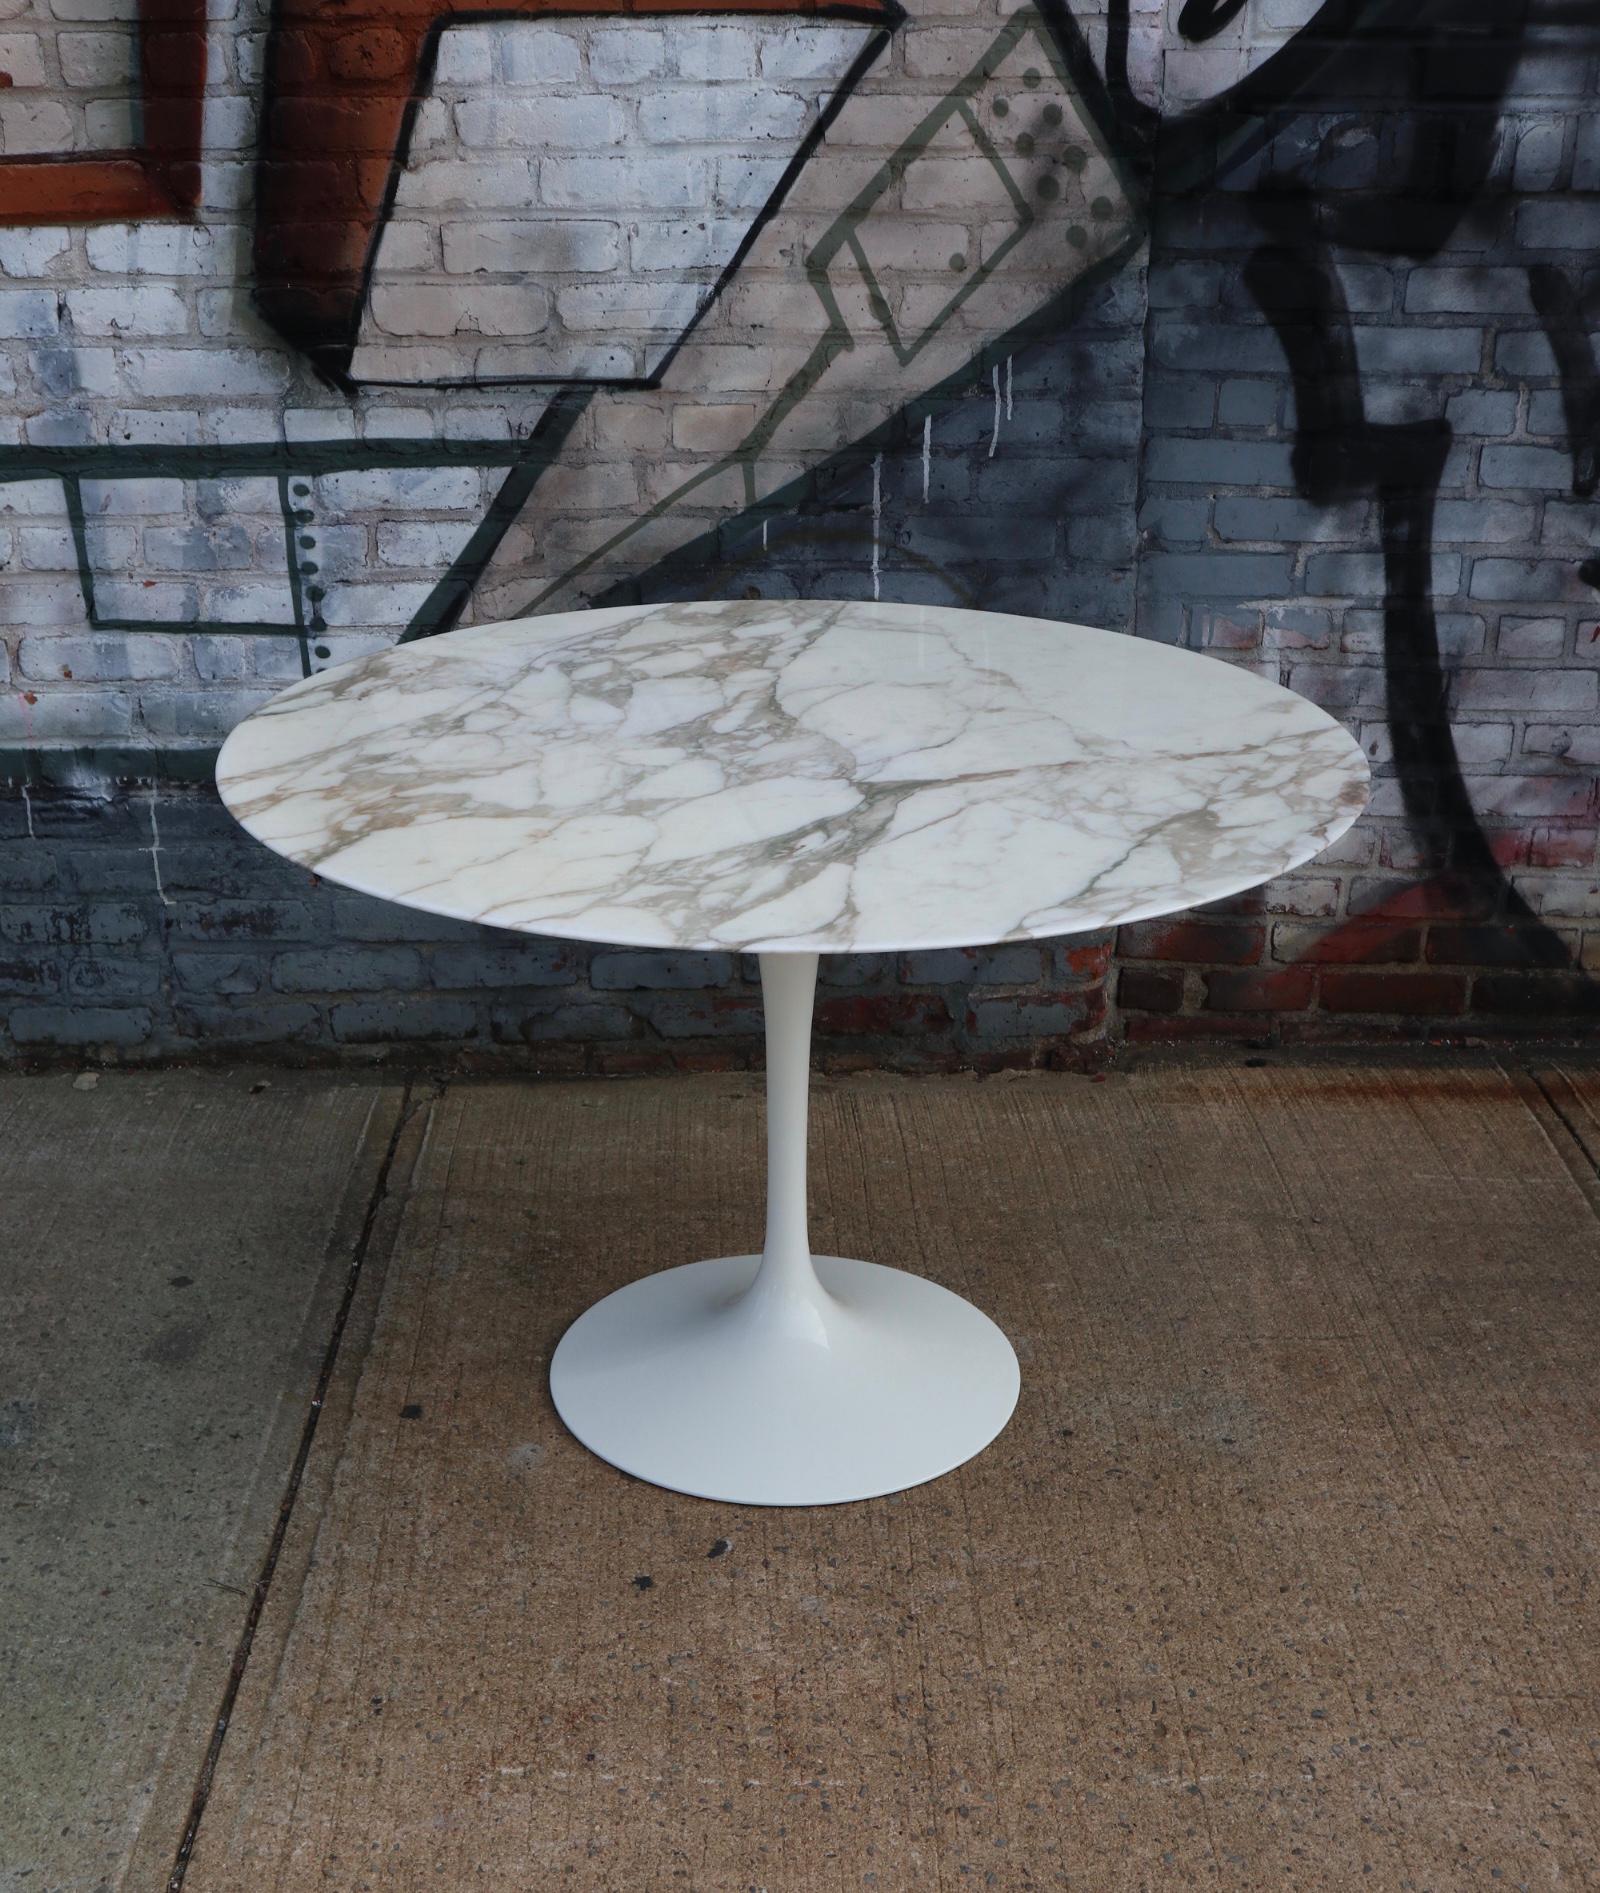 Gorgeous marble tulip dining table designed by Eero Saarinen for Knoll. In amazing condition. Cast aluminum base in white supporting divine circular top finishes in Calacatta Arabescato marble. Even and steady vein detail and color pattern. Knife